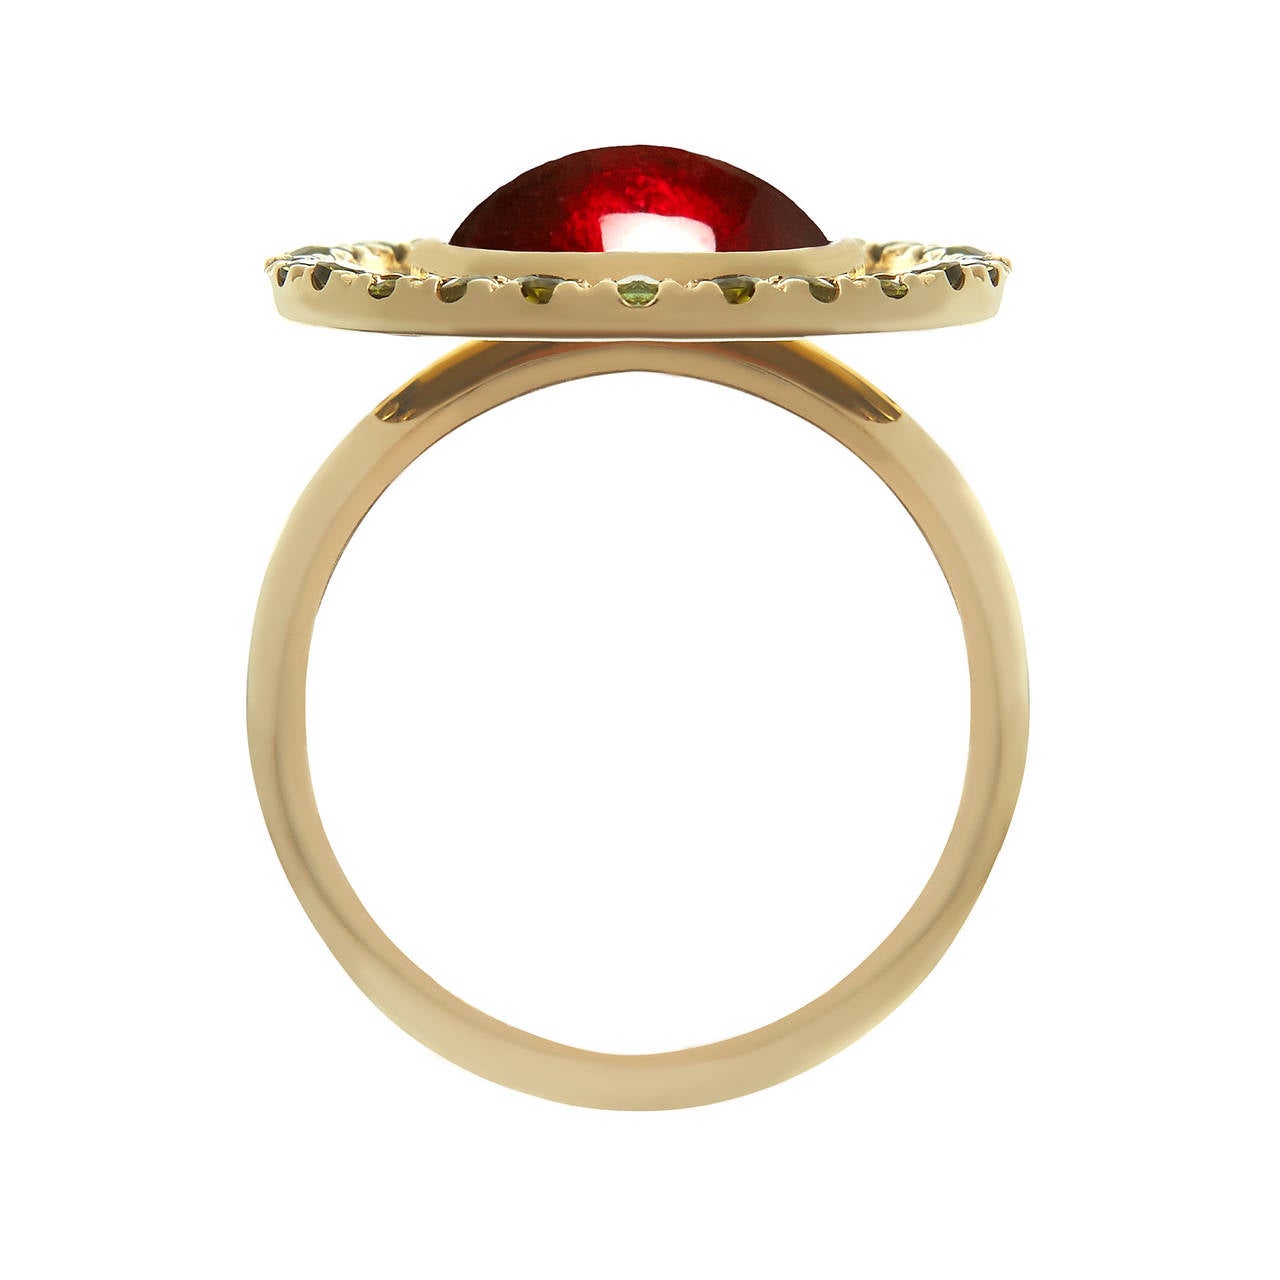 18ct yellow gold, garnet and green tourmaline ring
Hallmarked
Edition of 2
UK Ring Size N/O

In Tessa’s world wearing sweets is more fun than eating sweets. The designer cites the retro, sherbet-filled Flying Saucer sweet as the inspiration for this